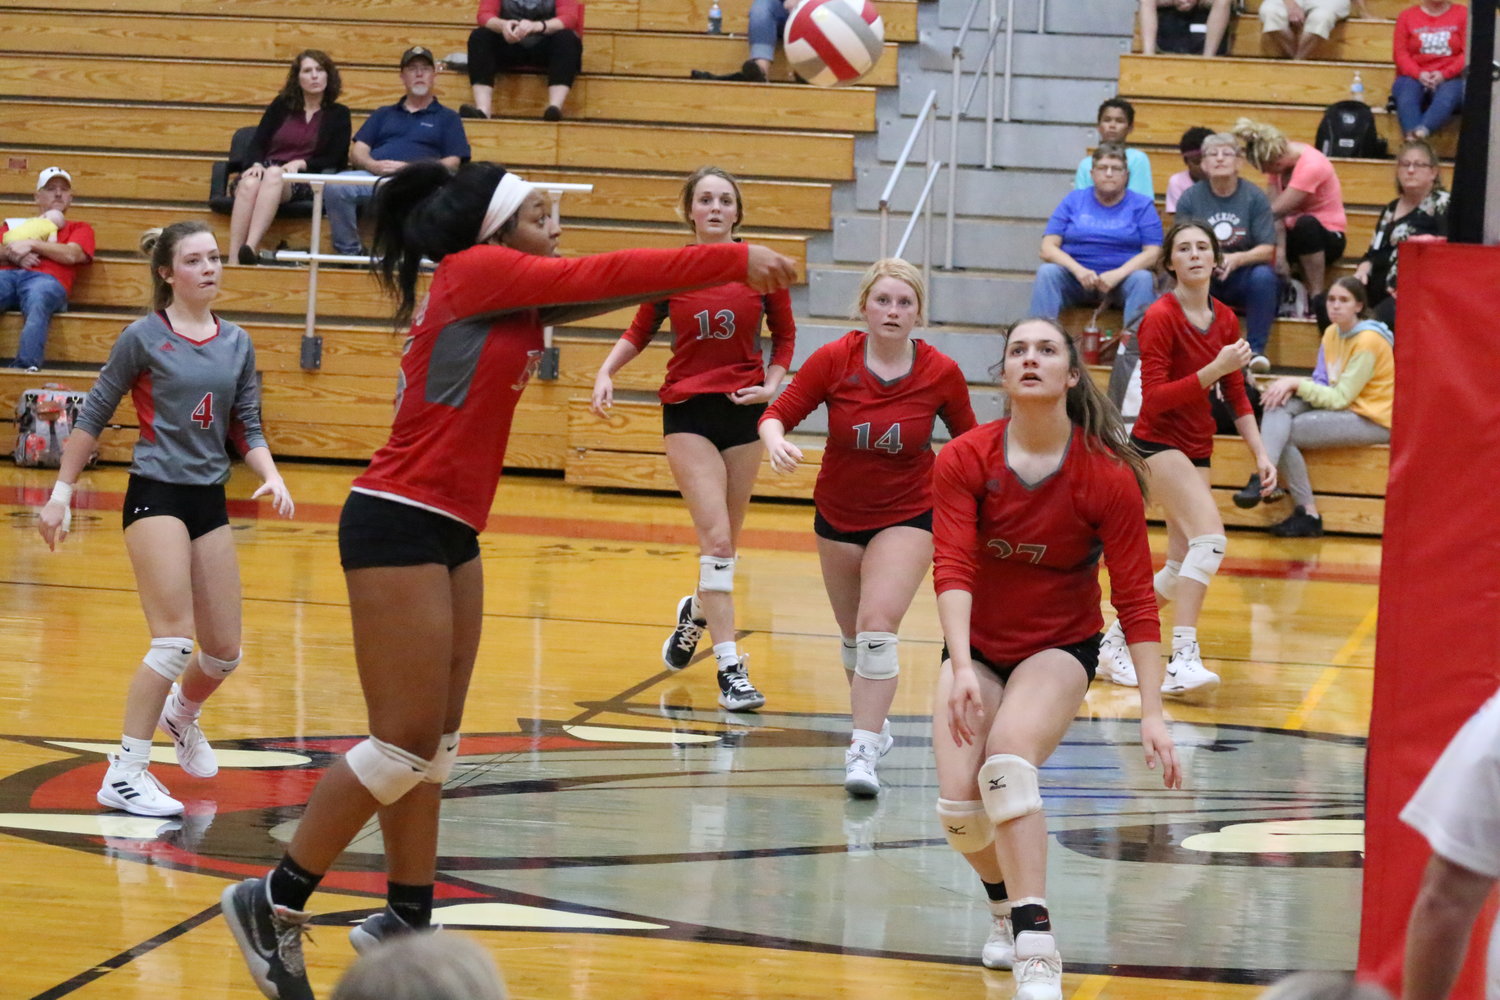 Capri’ona Fountain makes the play while Aleigha Jackson, Jessica Stephens, Ally Wilson, Emily Nunan and Emily Moppin file into position. [Dave Faries]